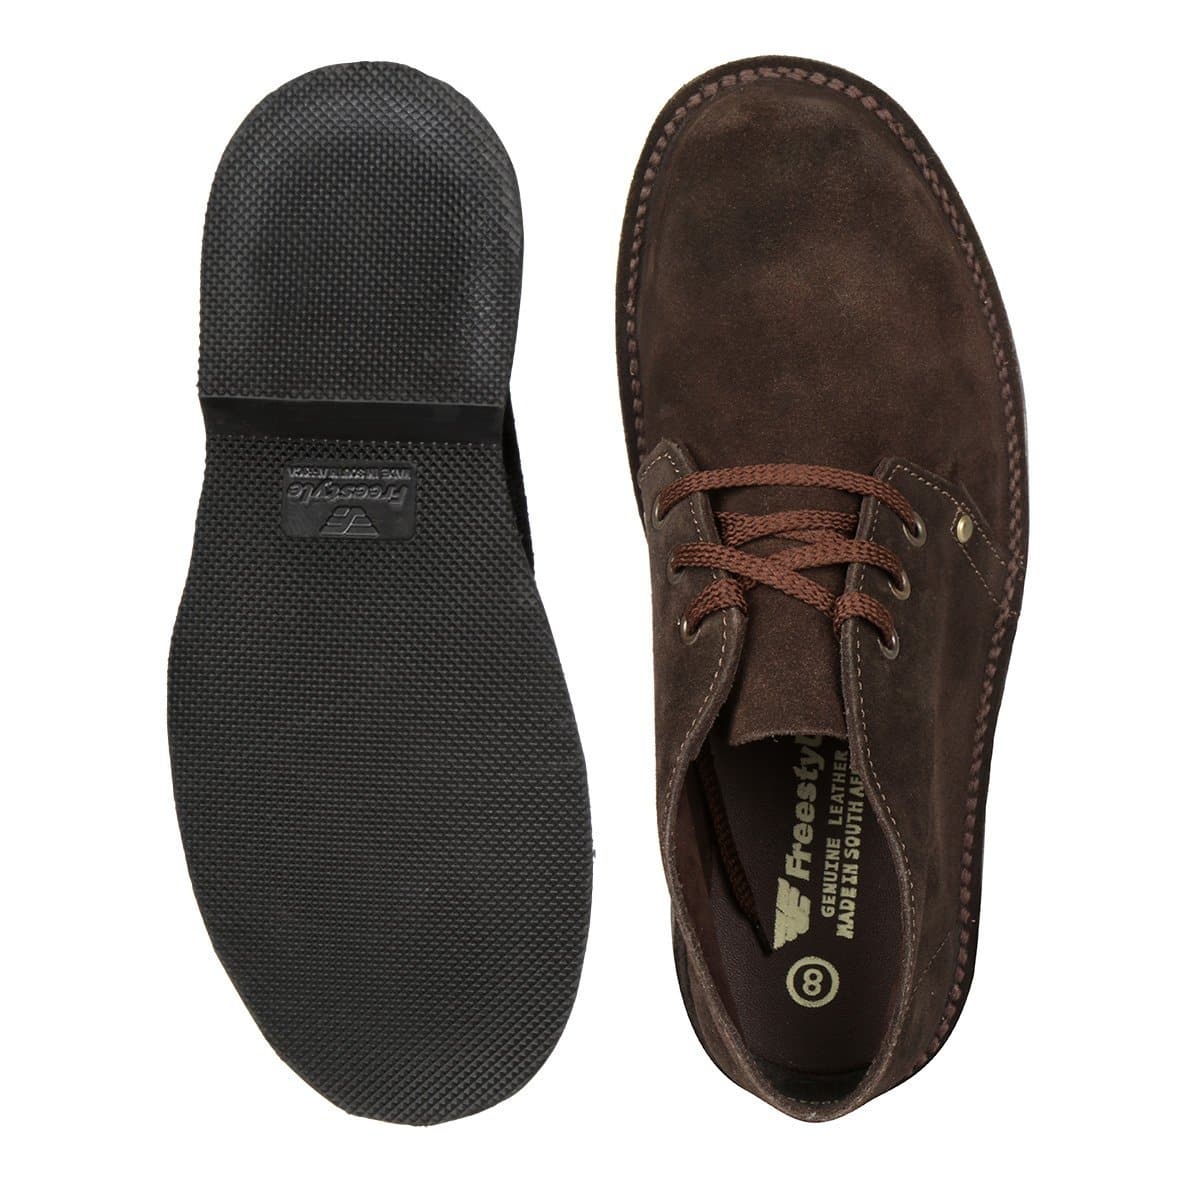 Stefan Vellie Suede - Freestyle SA Proudly local leather boots veldskoens vellies leather shoes suede veldskoens